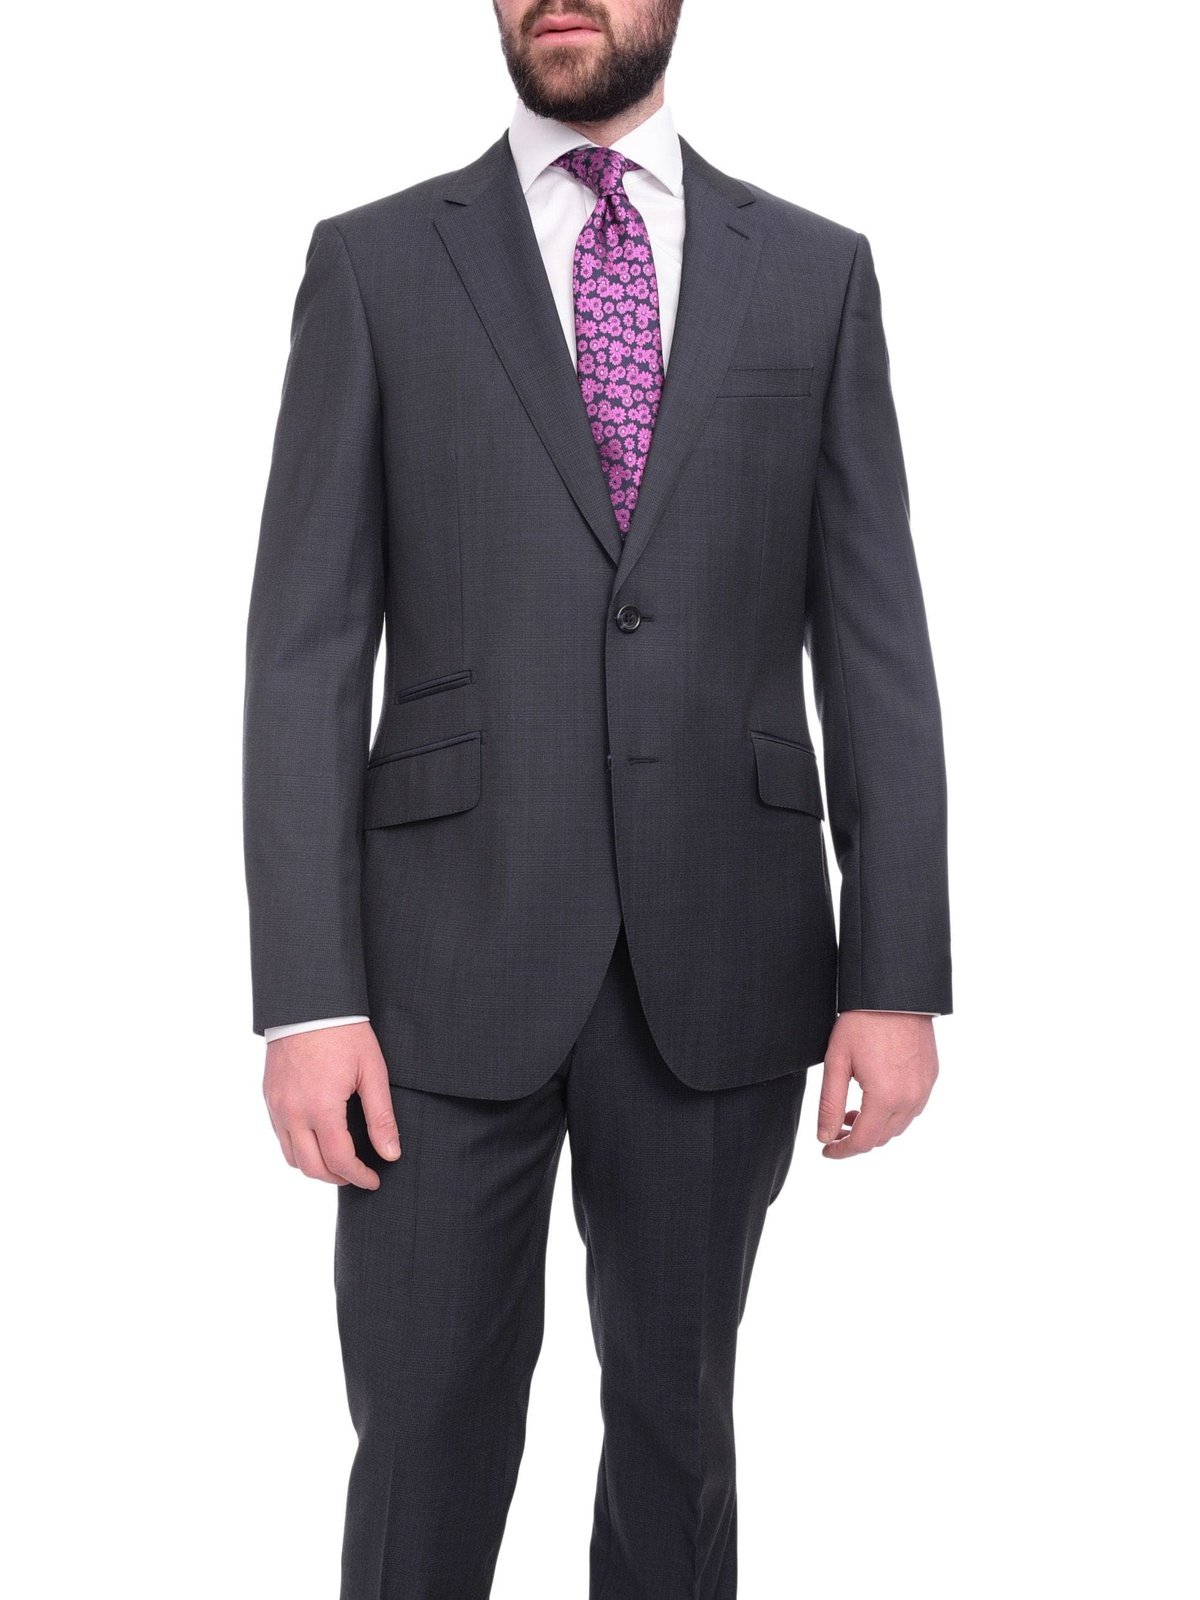 Napoli TWO PIECE SUITS Napoli Slim Fit Navy Blue Plaid Half Canvassed Marzotto Wool Suit Slanted Pocket